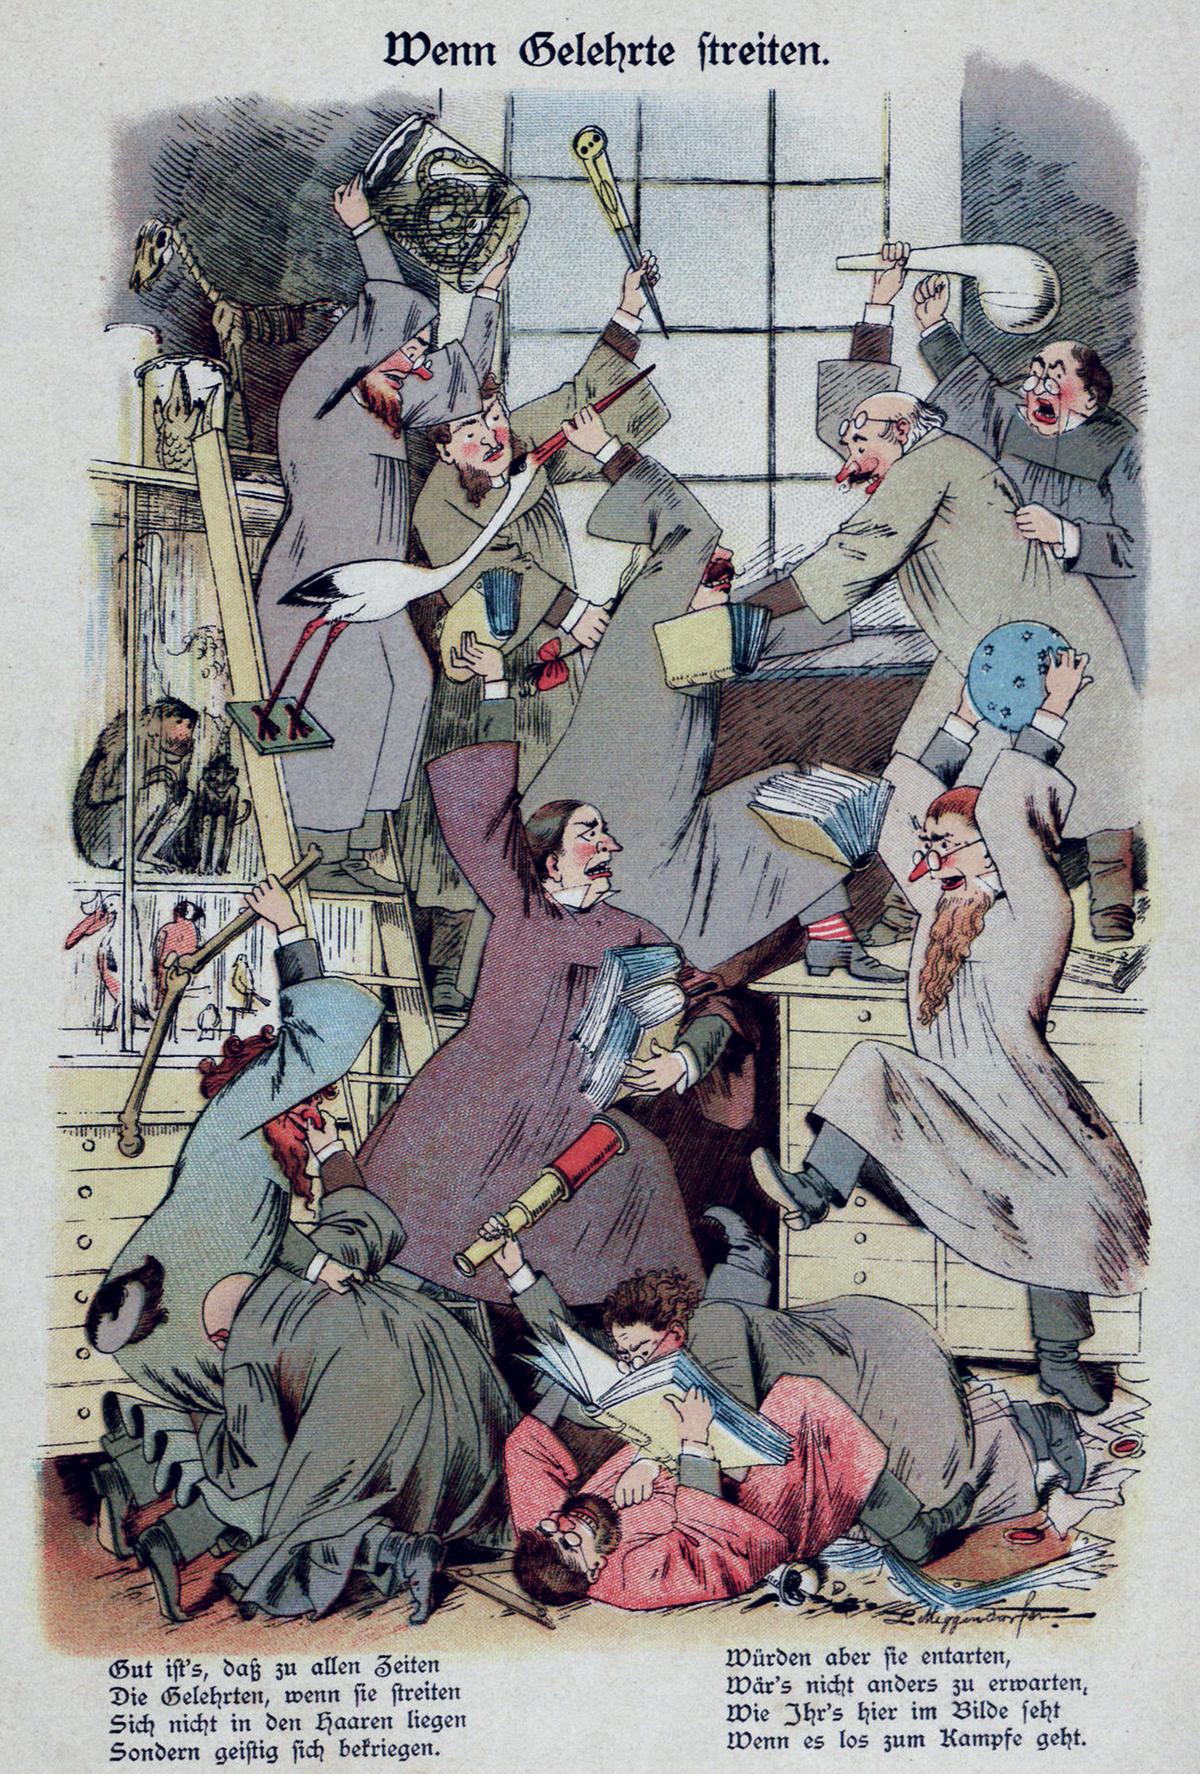 "When Scholars Argue," 1890, from Humoristic Monthly Magazines. The translation of the text on the image: It is good that at all times, the scholars, when they argue don’t get into a bar-fight, but just intellectually spar with each other. But WERE things to get physical, one wouldn't be wrong to imagine that it would look something like what you see in the picture here, when they get into it. (Public Domain)